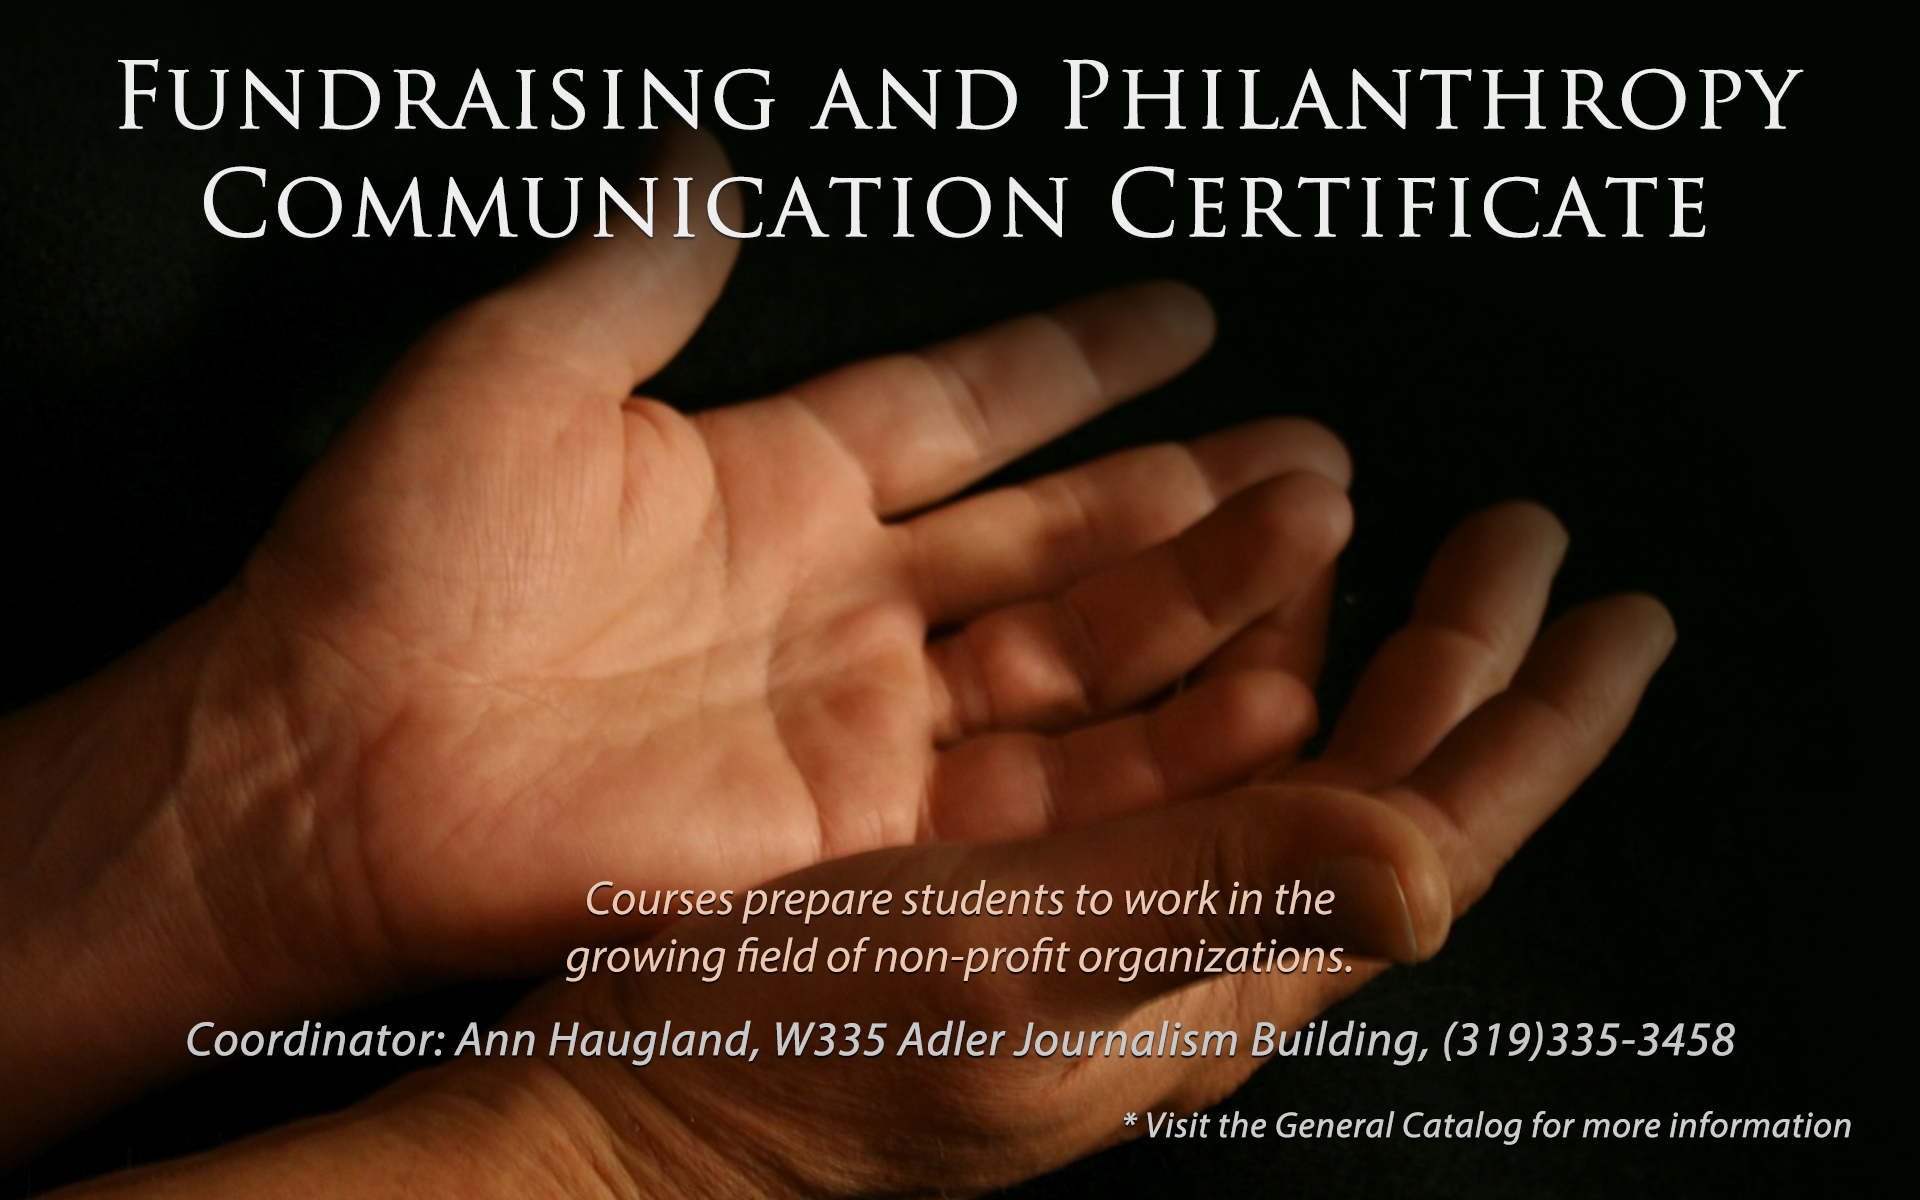 Fundraising and Philanthropy Communication Certificate